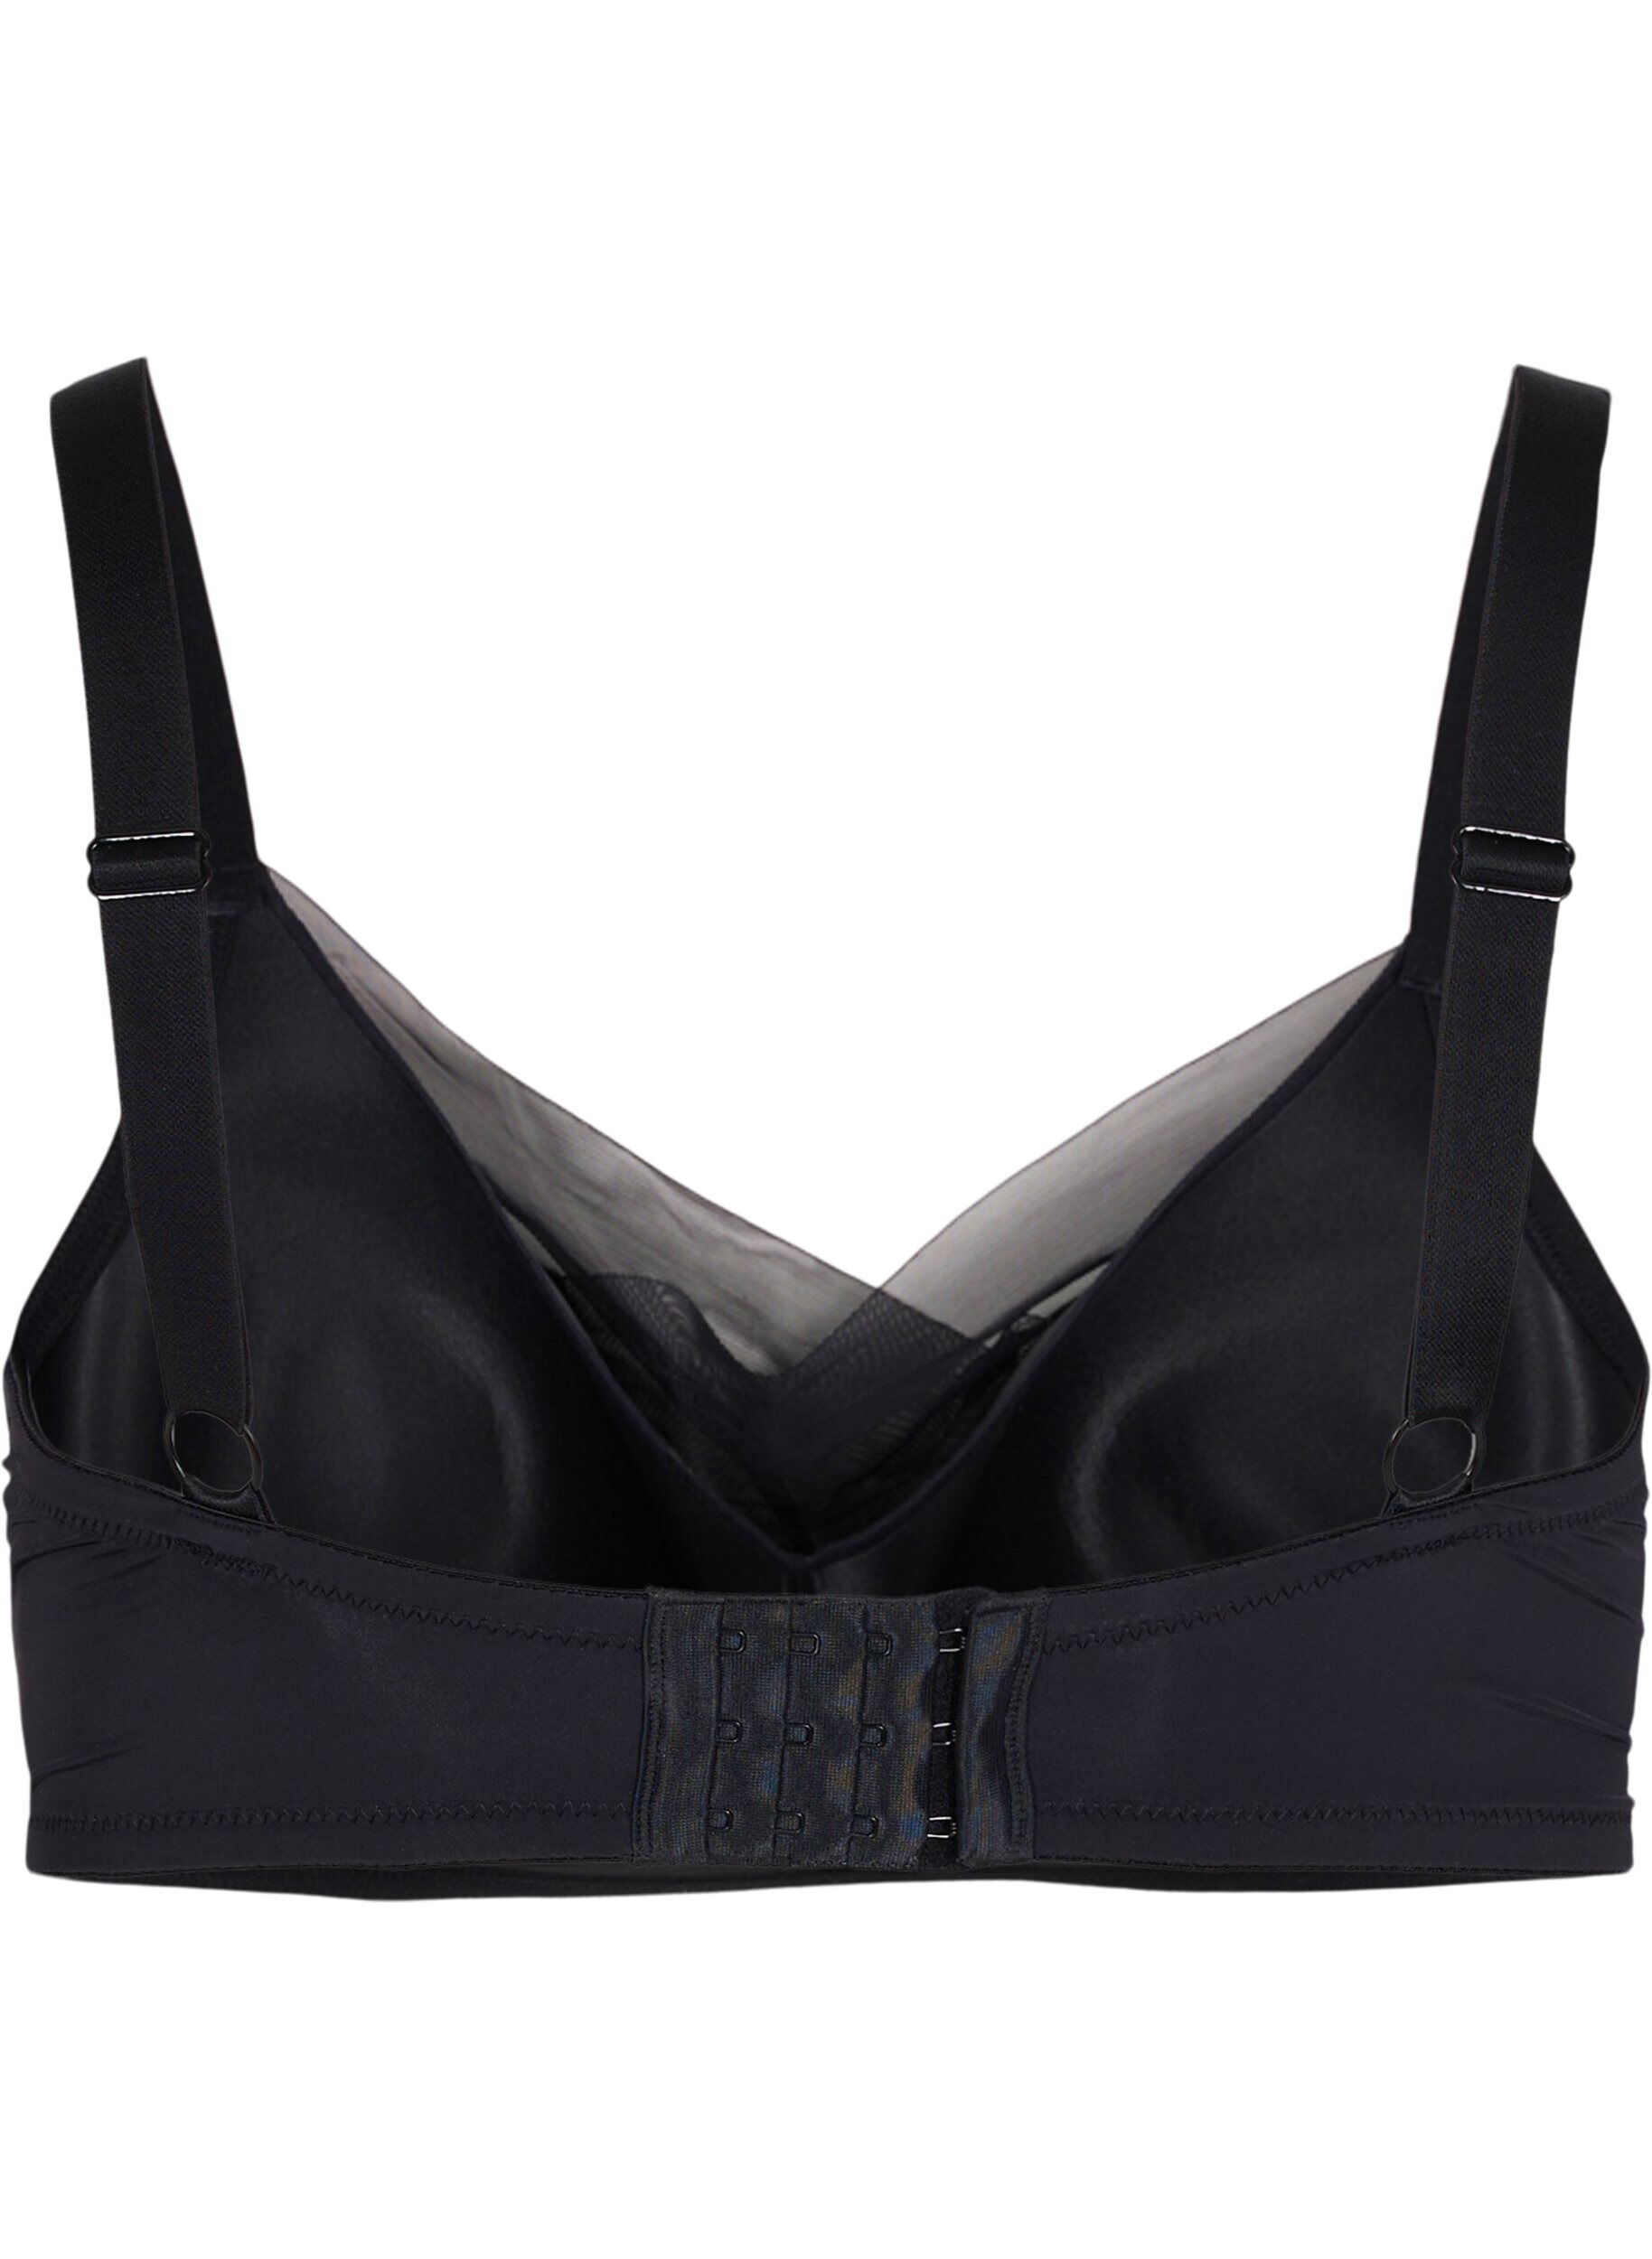 Bra with mesh and padded cups